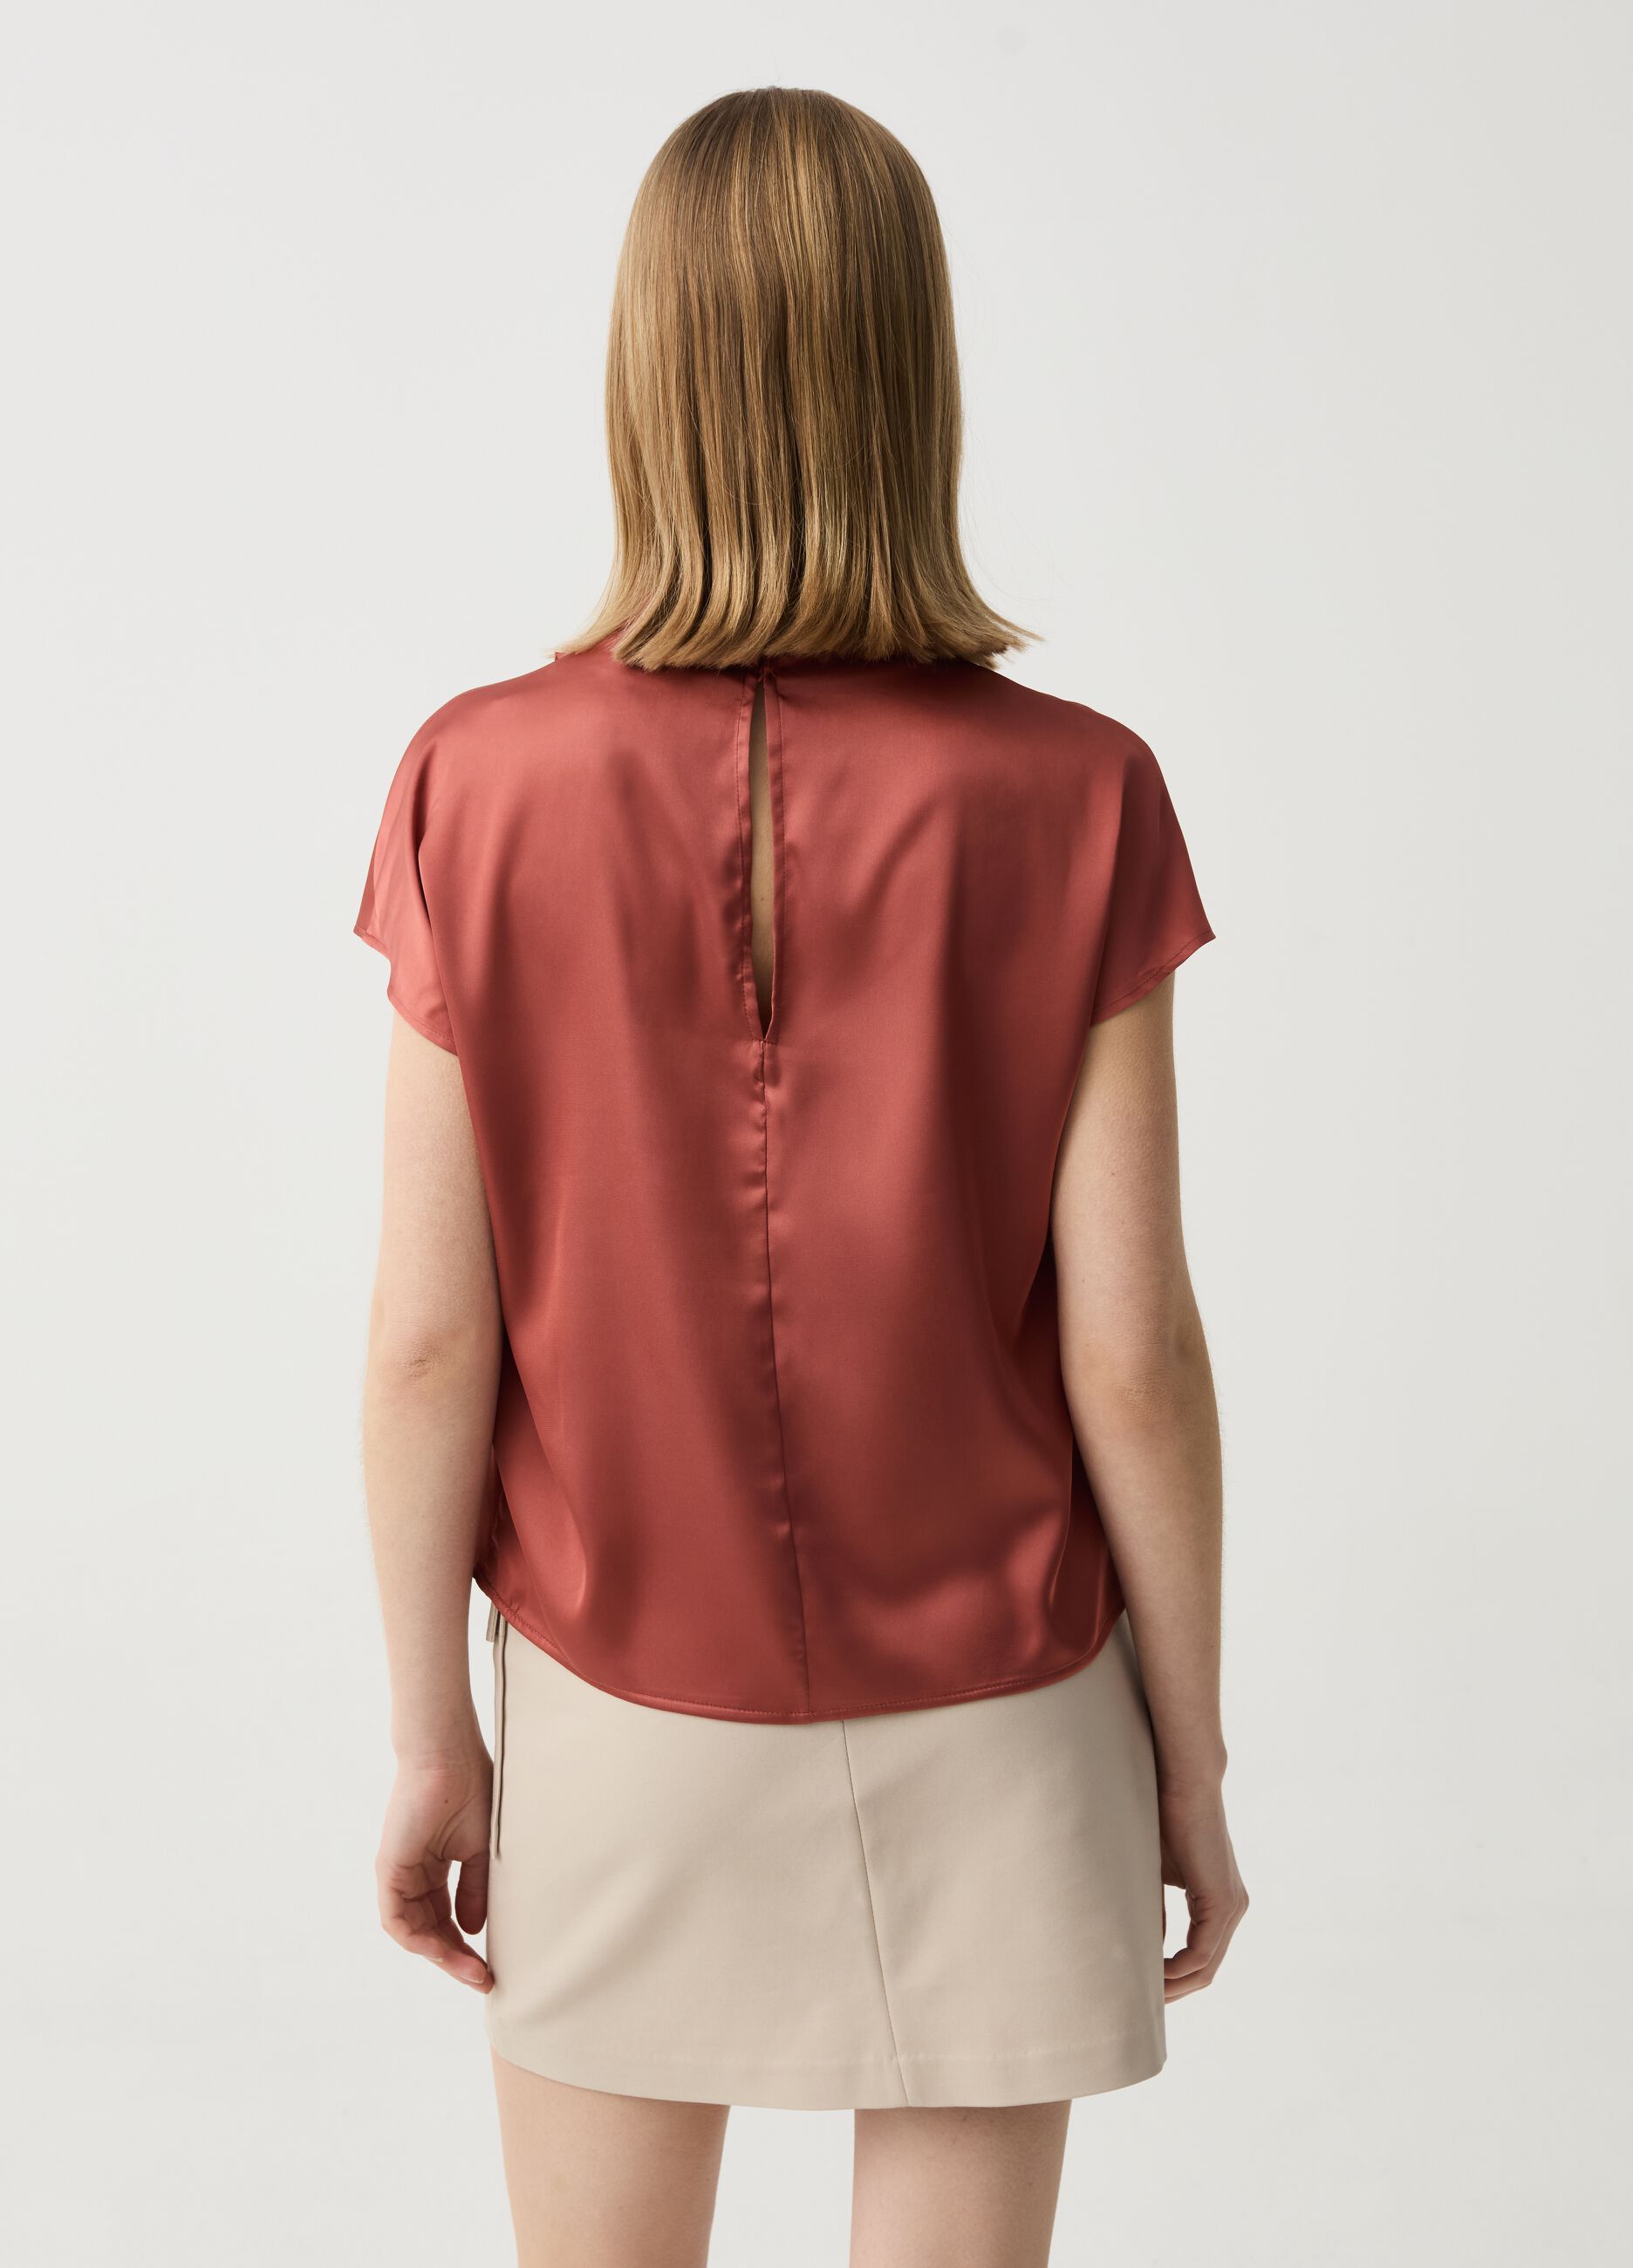 Satin blouse with high neck and draping